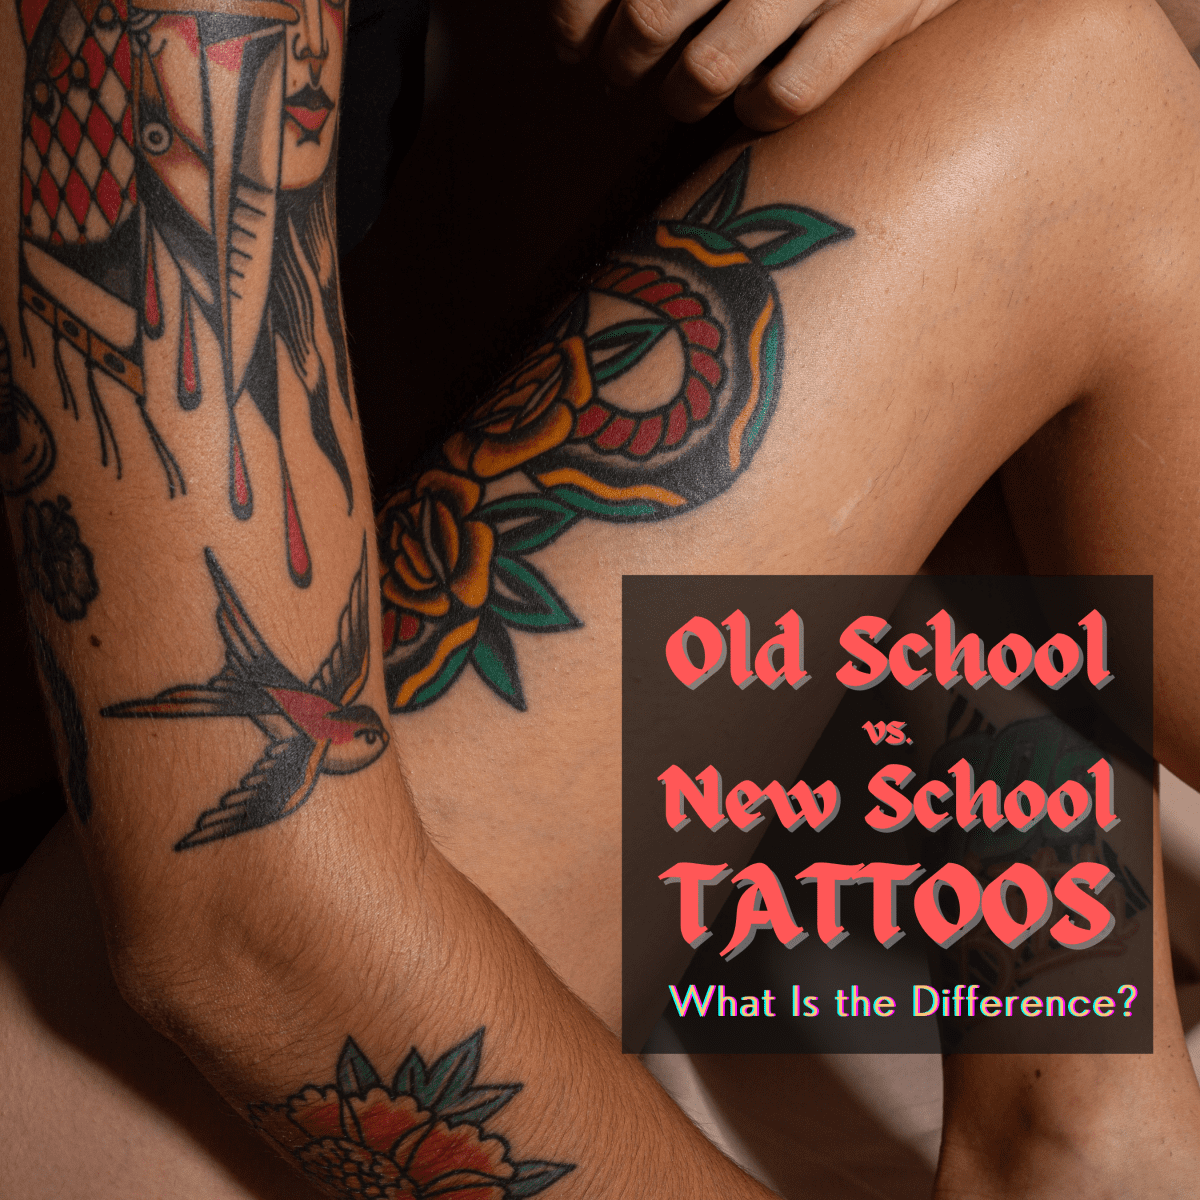 Academics Share Pictures of Their Tattoos